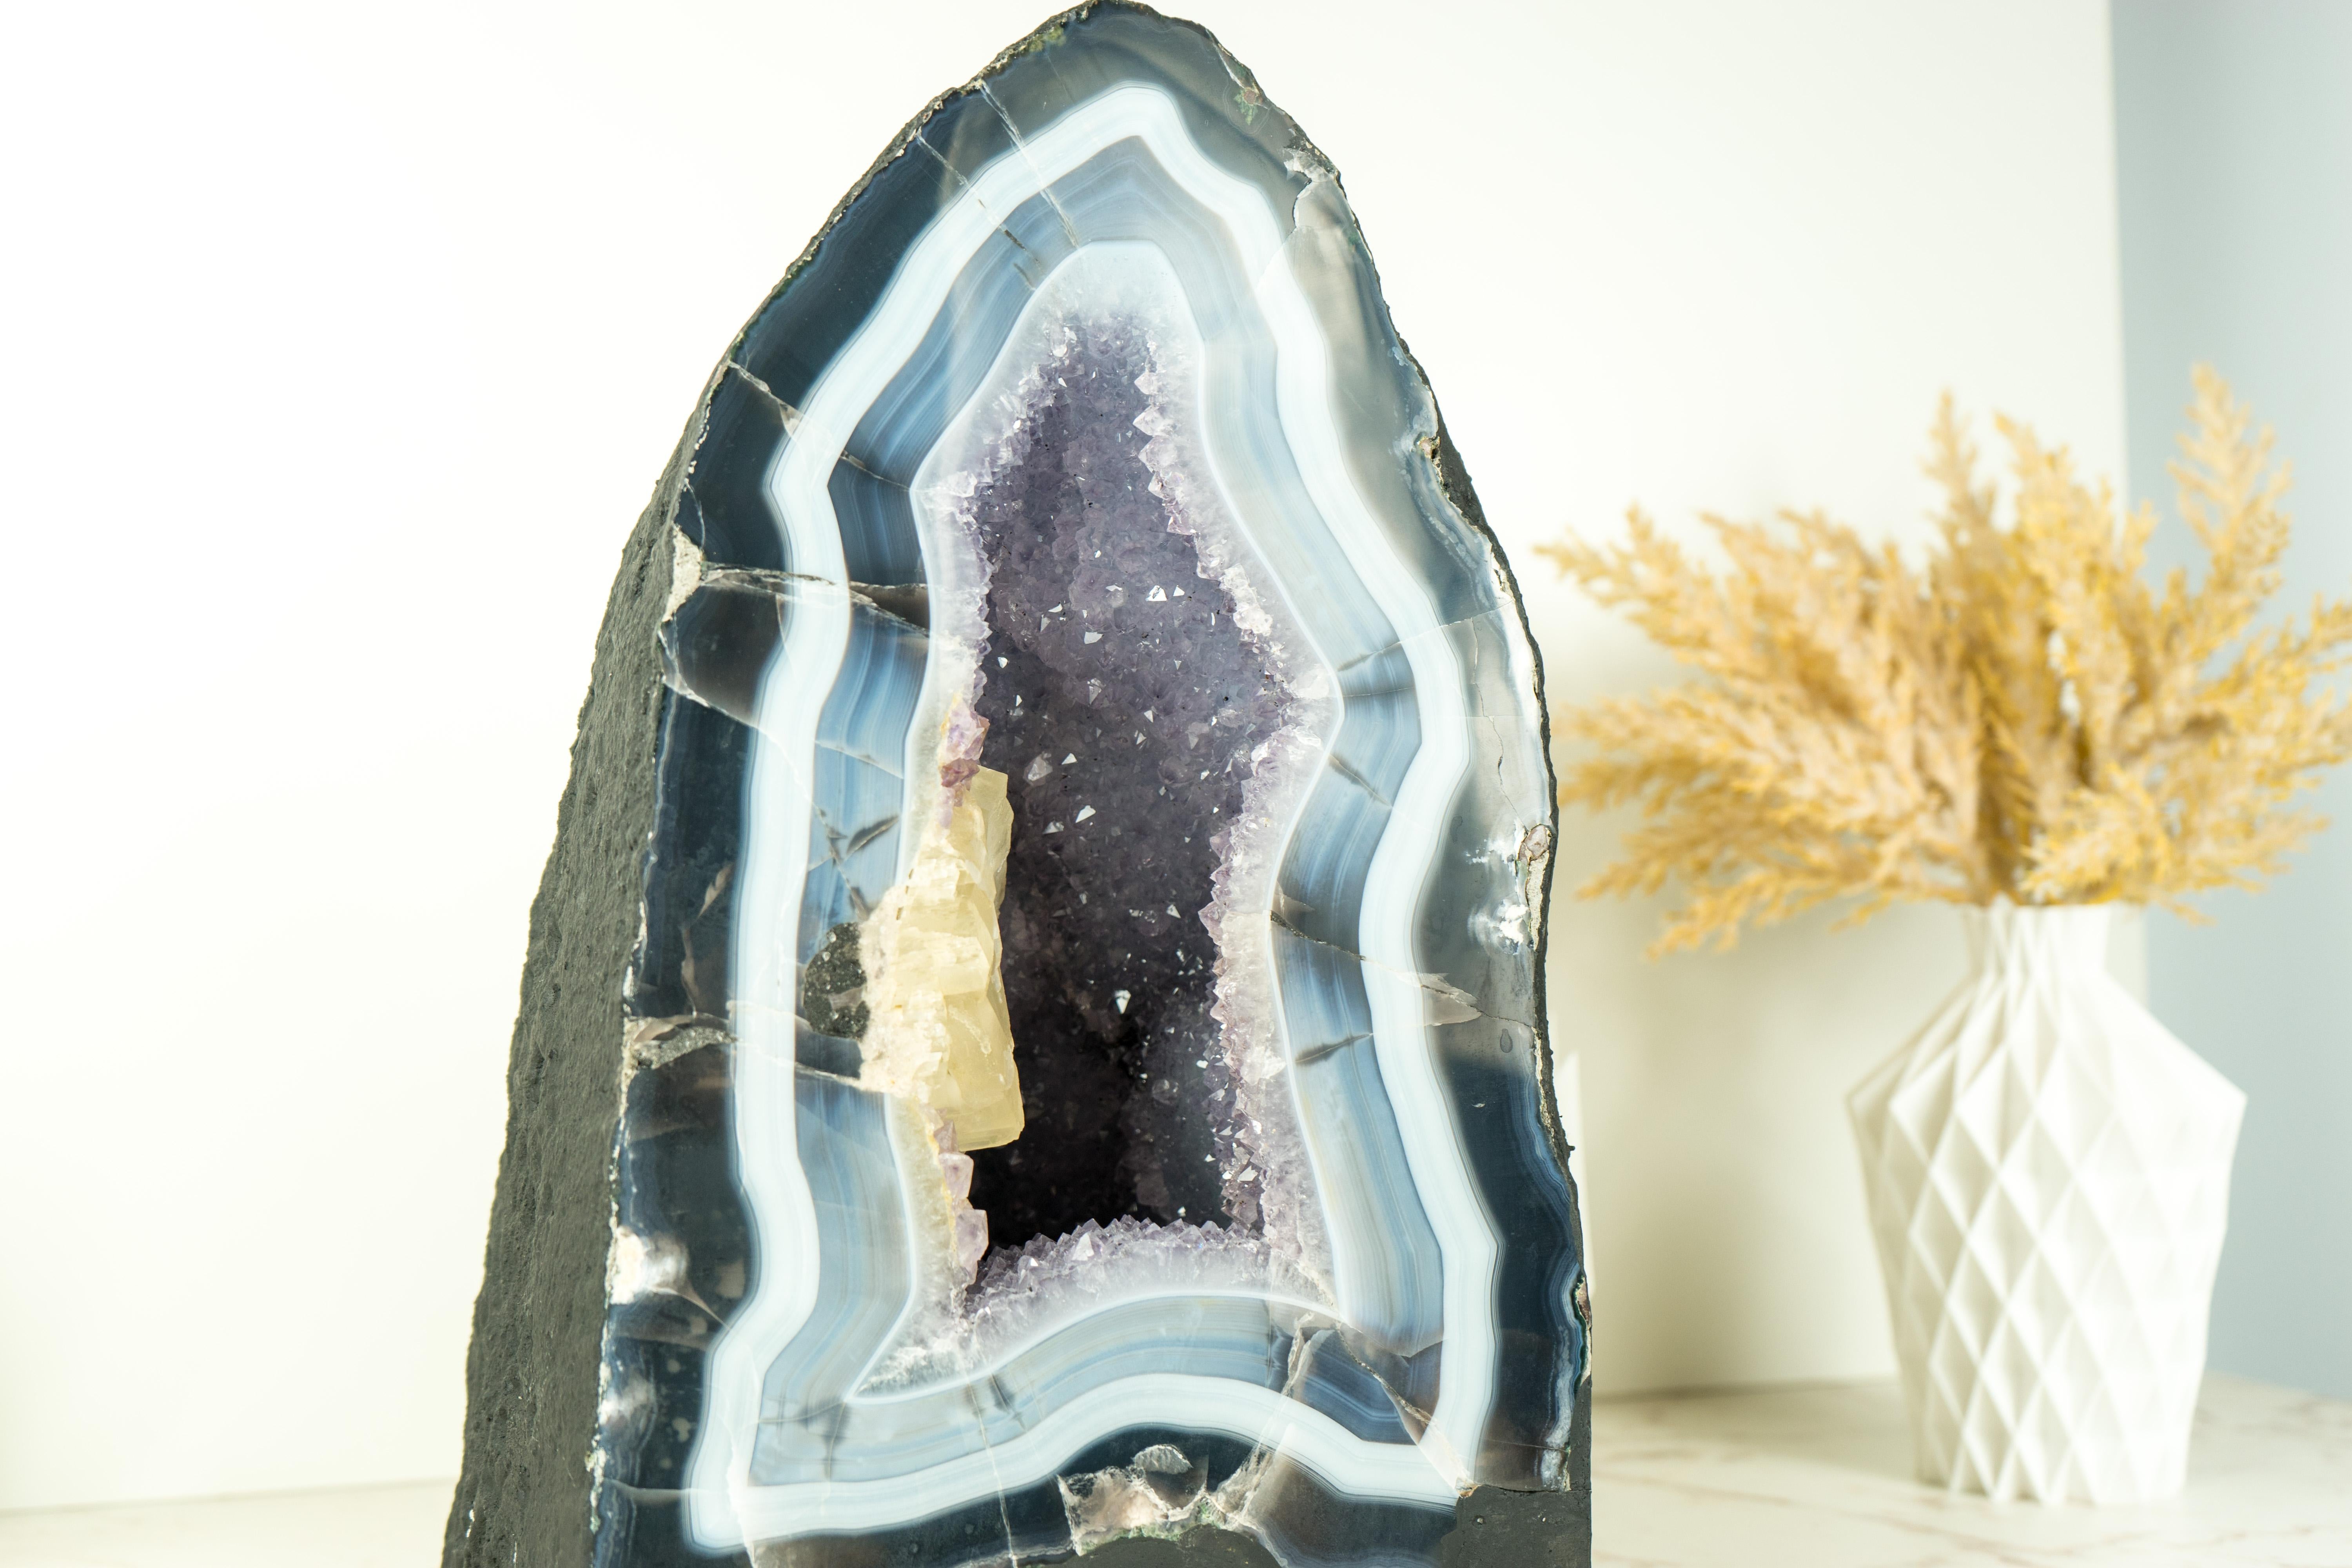 An Agate Geode that is unlike any we have ever encountered. While agate geodes are not rare, this particular specimen stands out as superior. Its bold, distinctively large agate bands encircle the entire piece, creating a zonation indicative of